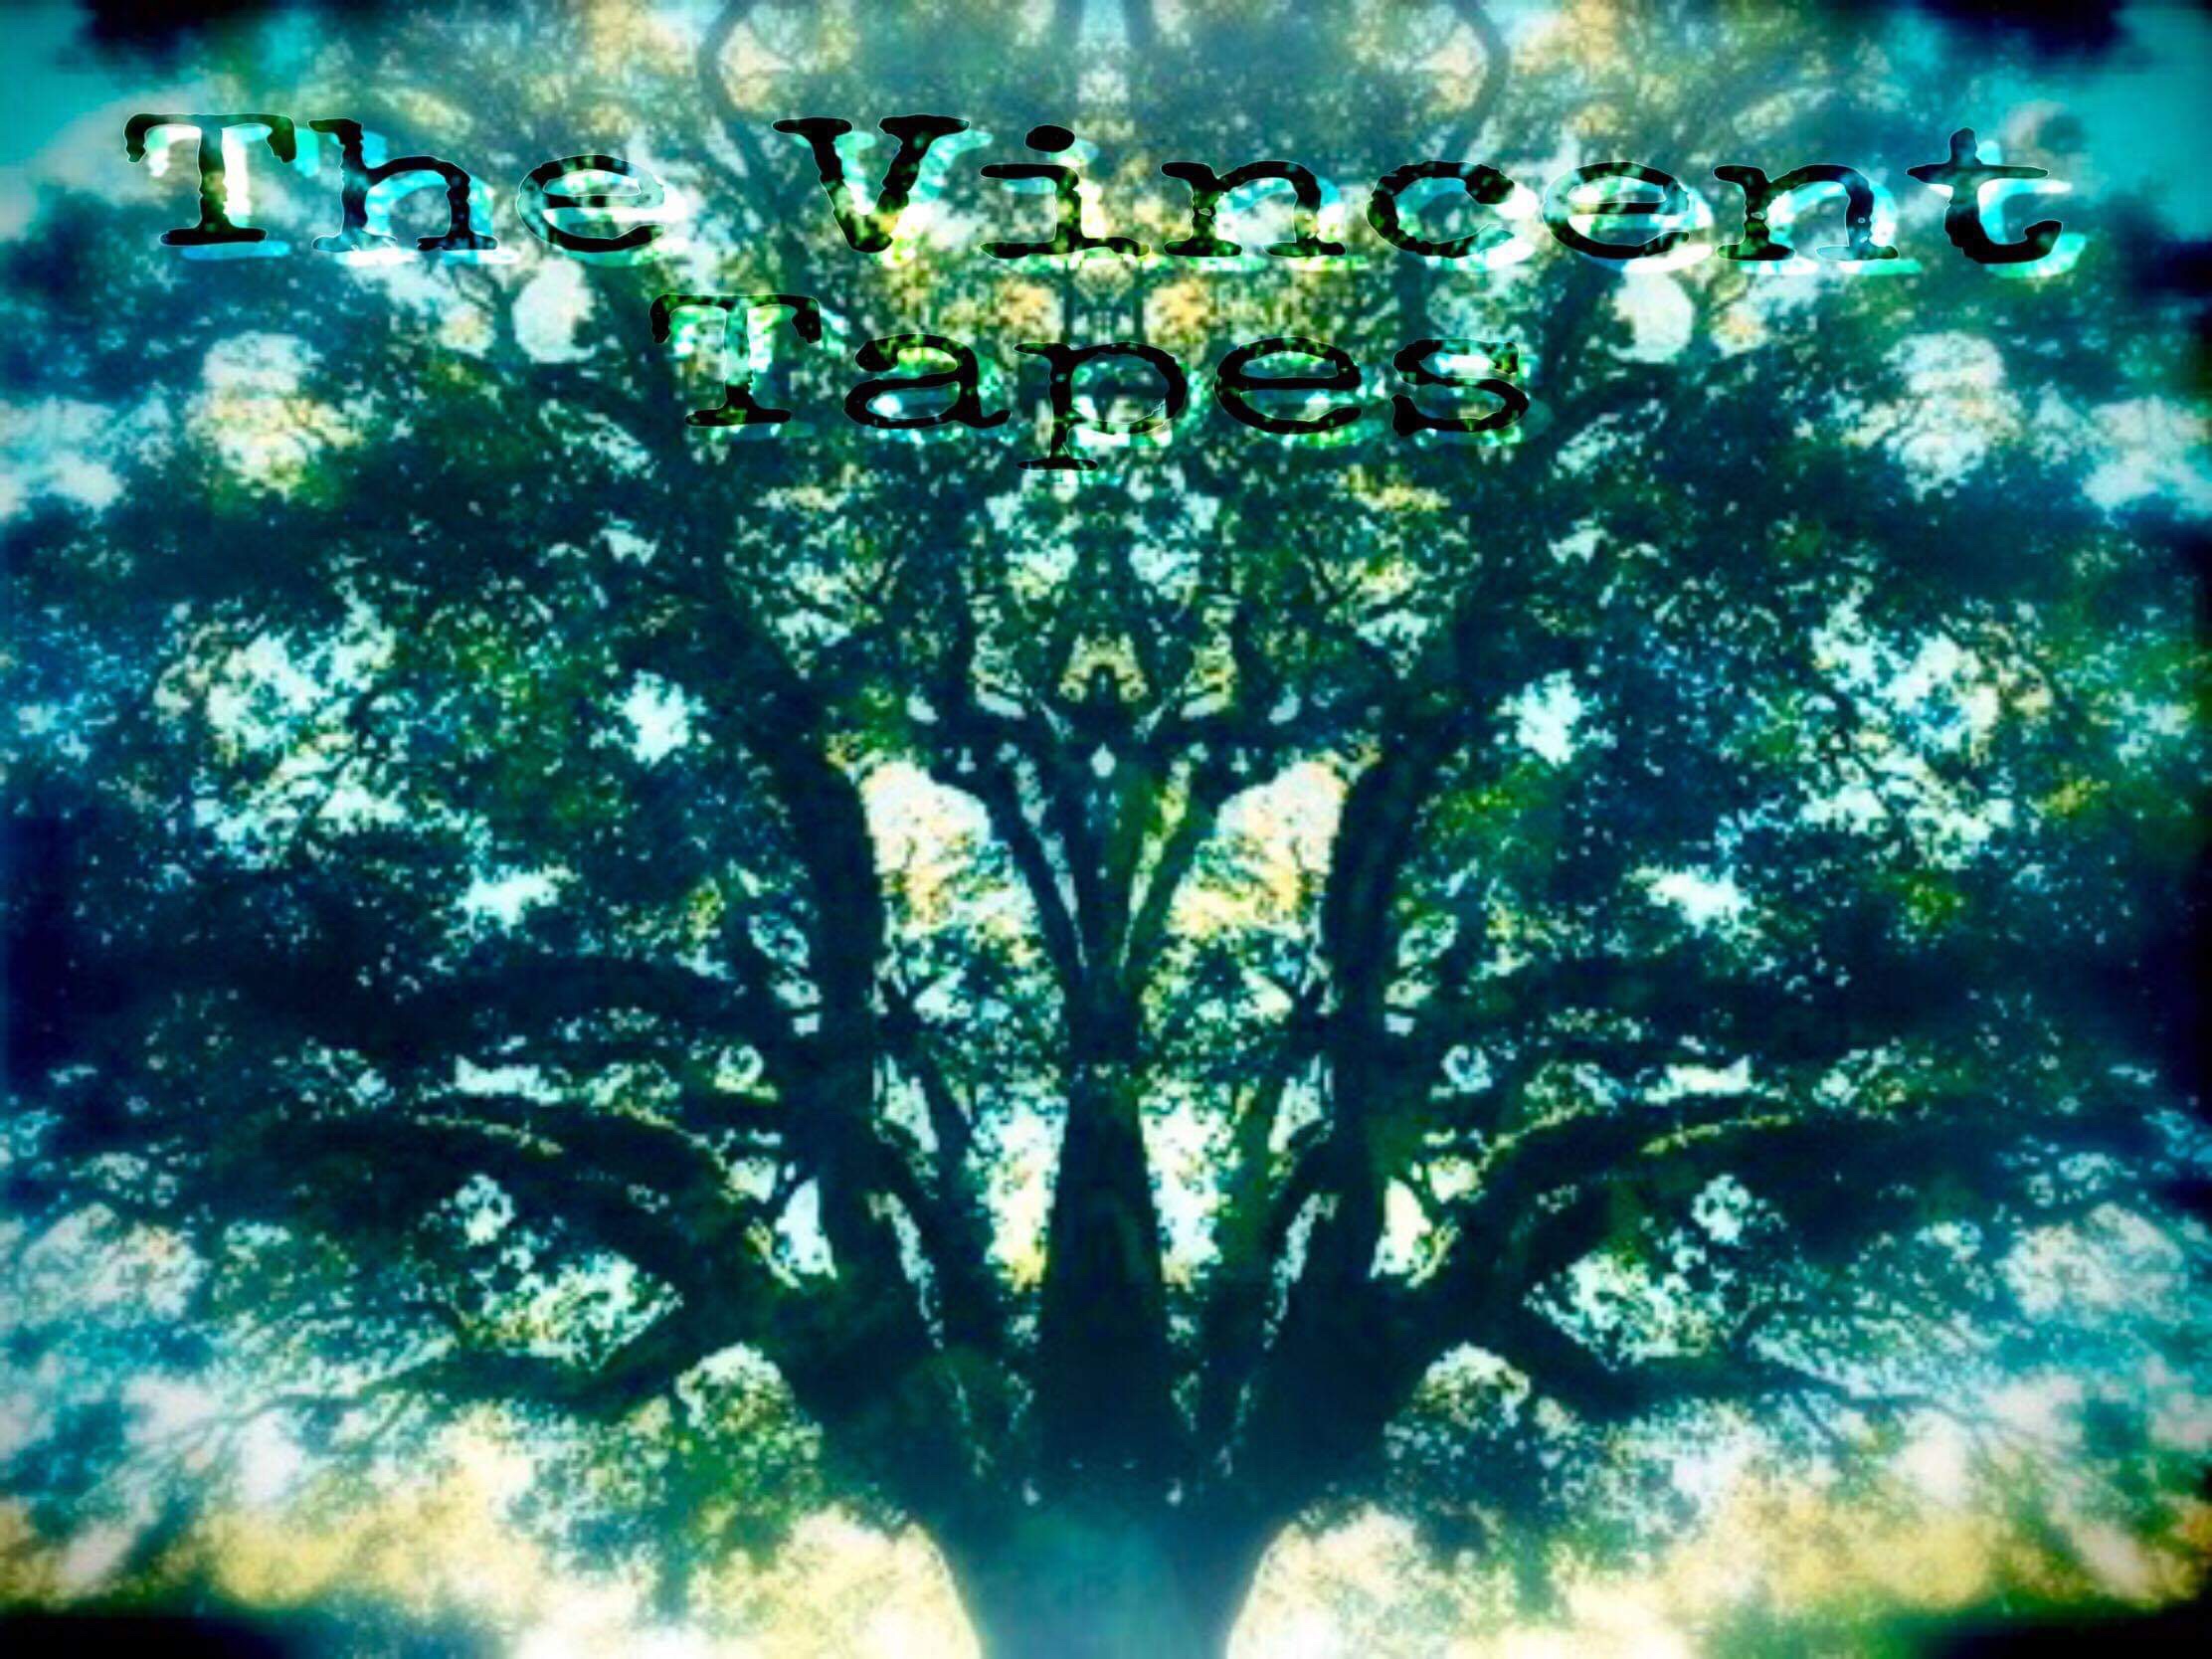 ME34 - The Vincent Tapes - “The Wailing Tree”